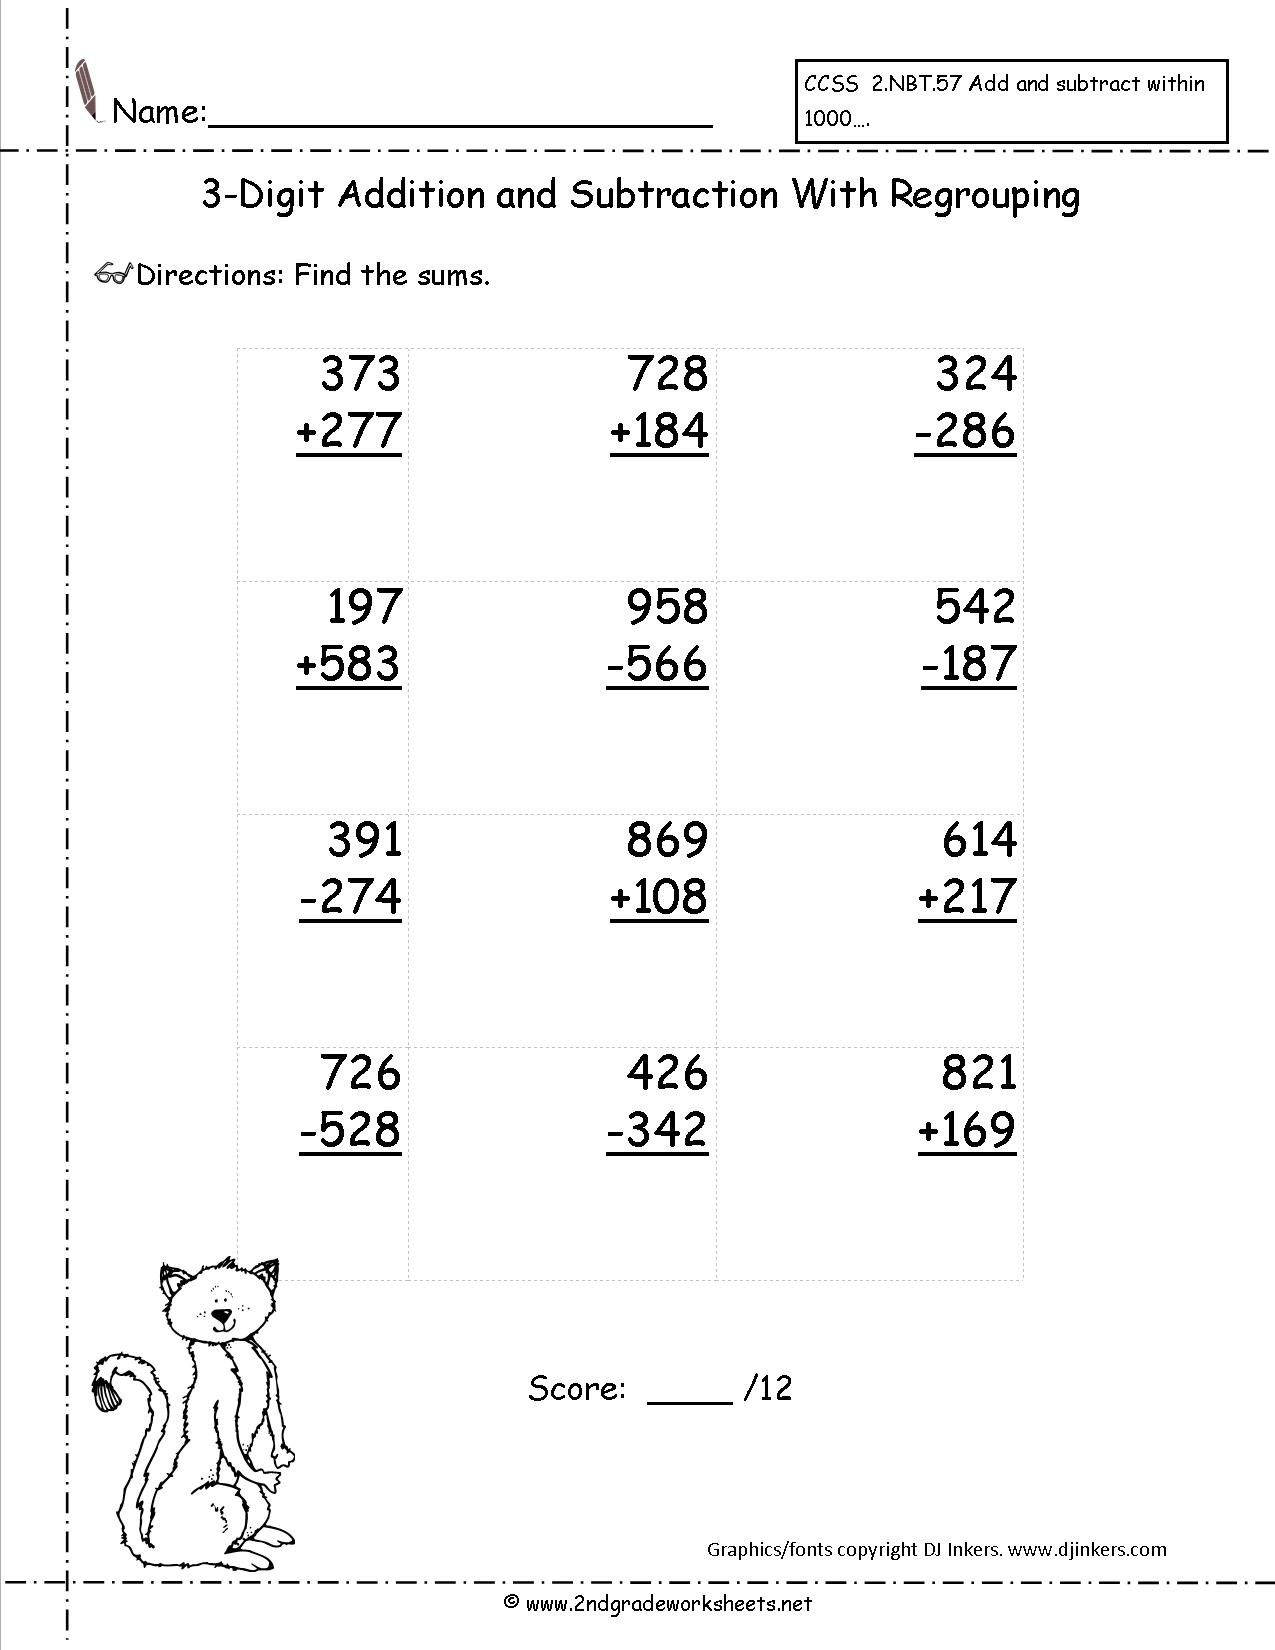 Three Digit Addition And Subtraction Worksheets From The Teacher&amp;#039;s Guide - Free Printable Mixed Addition And Subtraction Worksheets